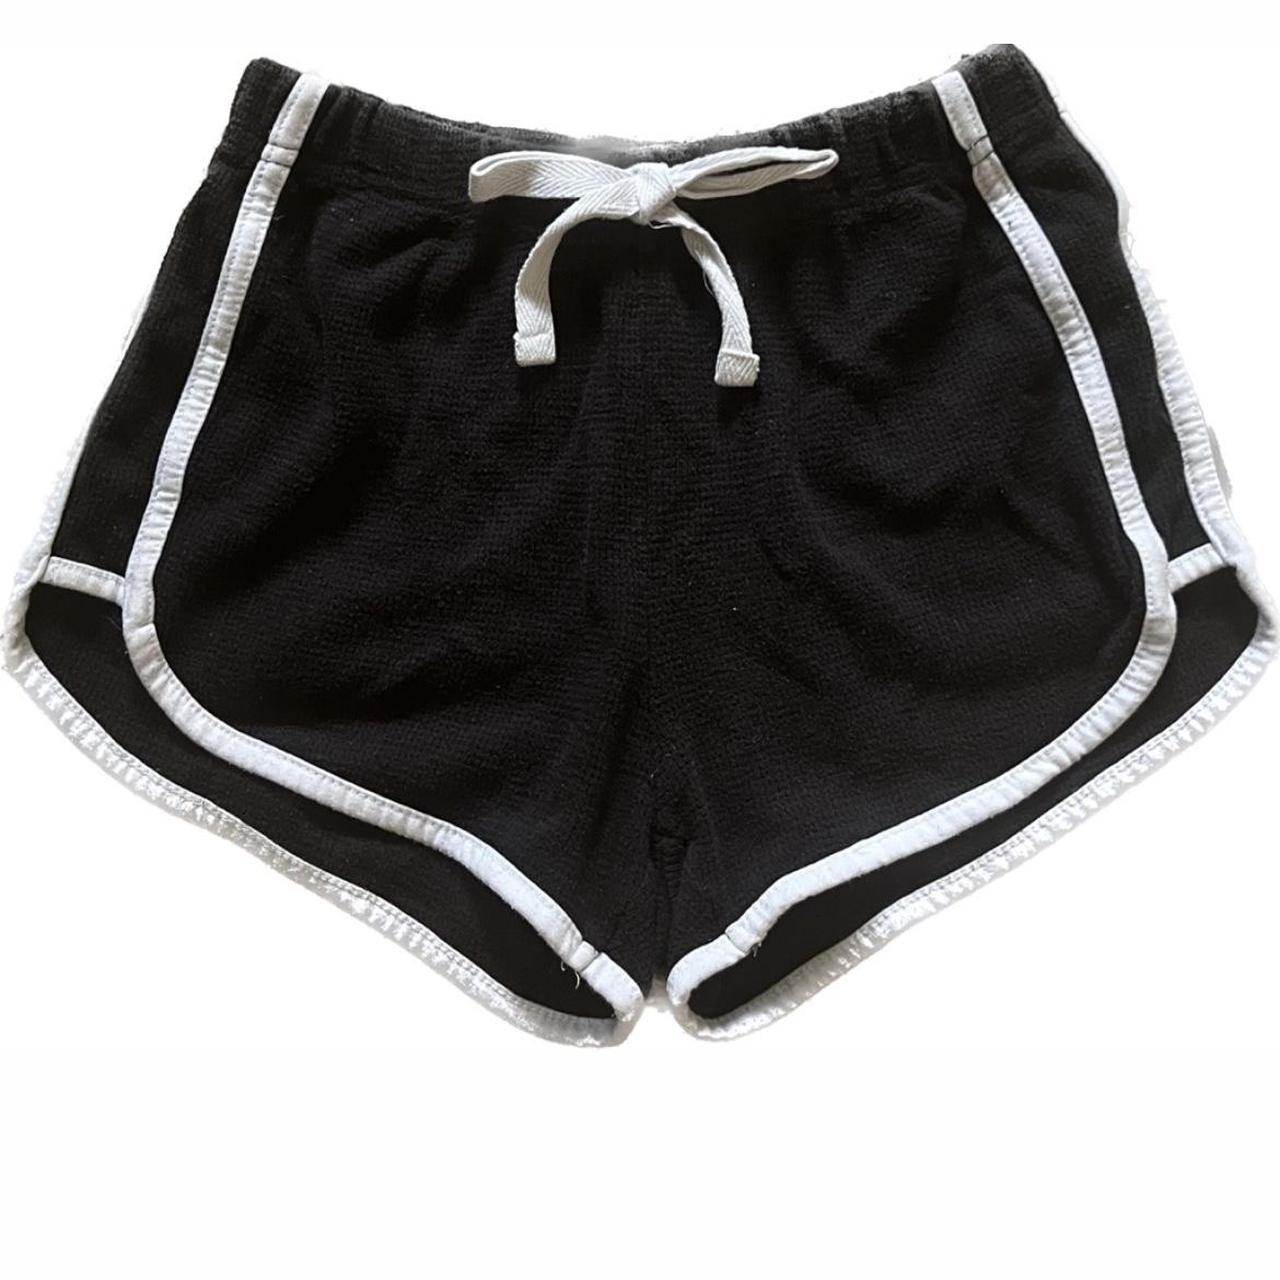 Full Circle Trends Women's Black and White Shorts